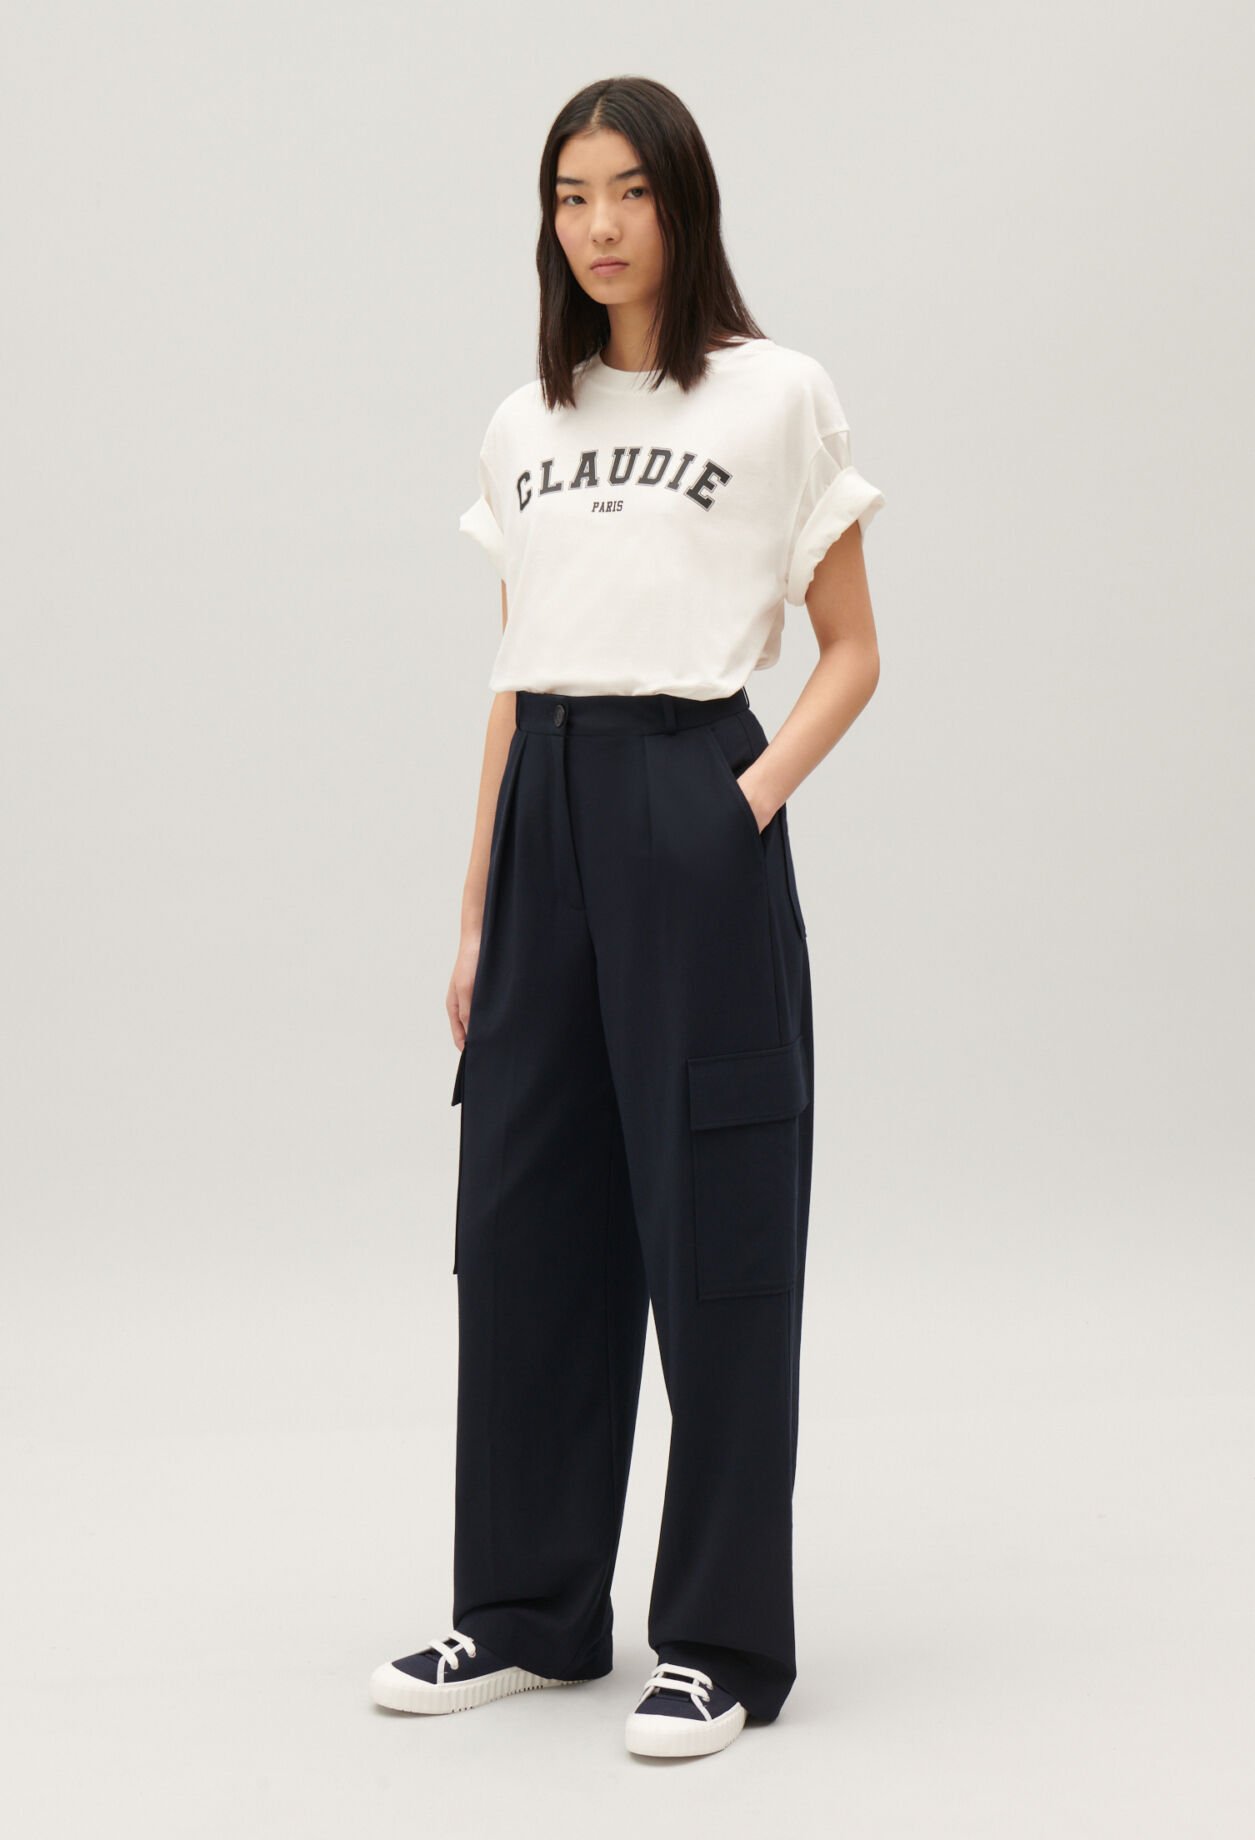 Navy cargo trousers